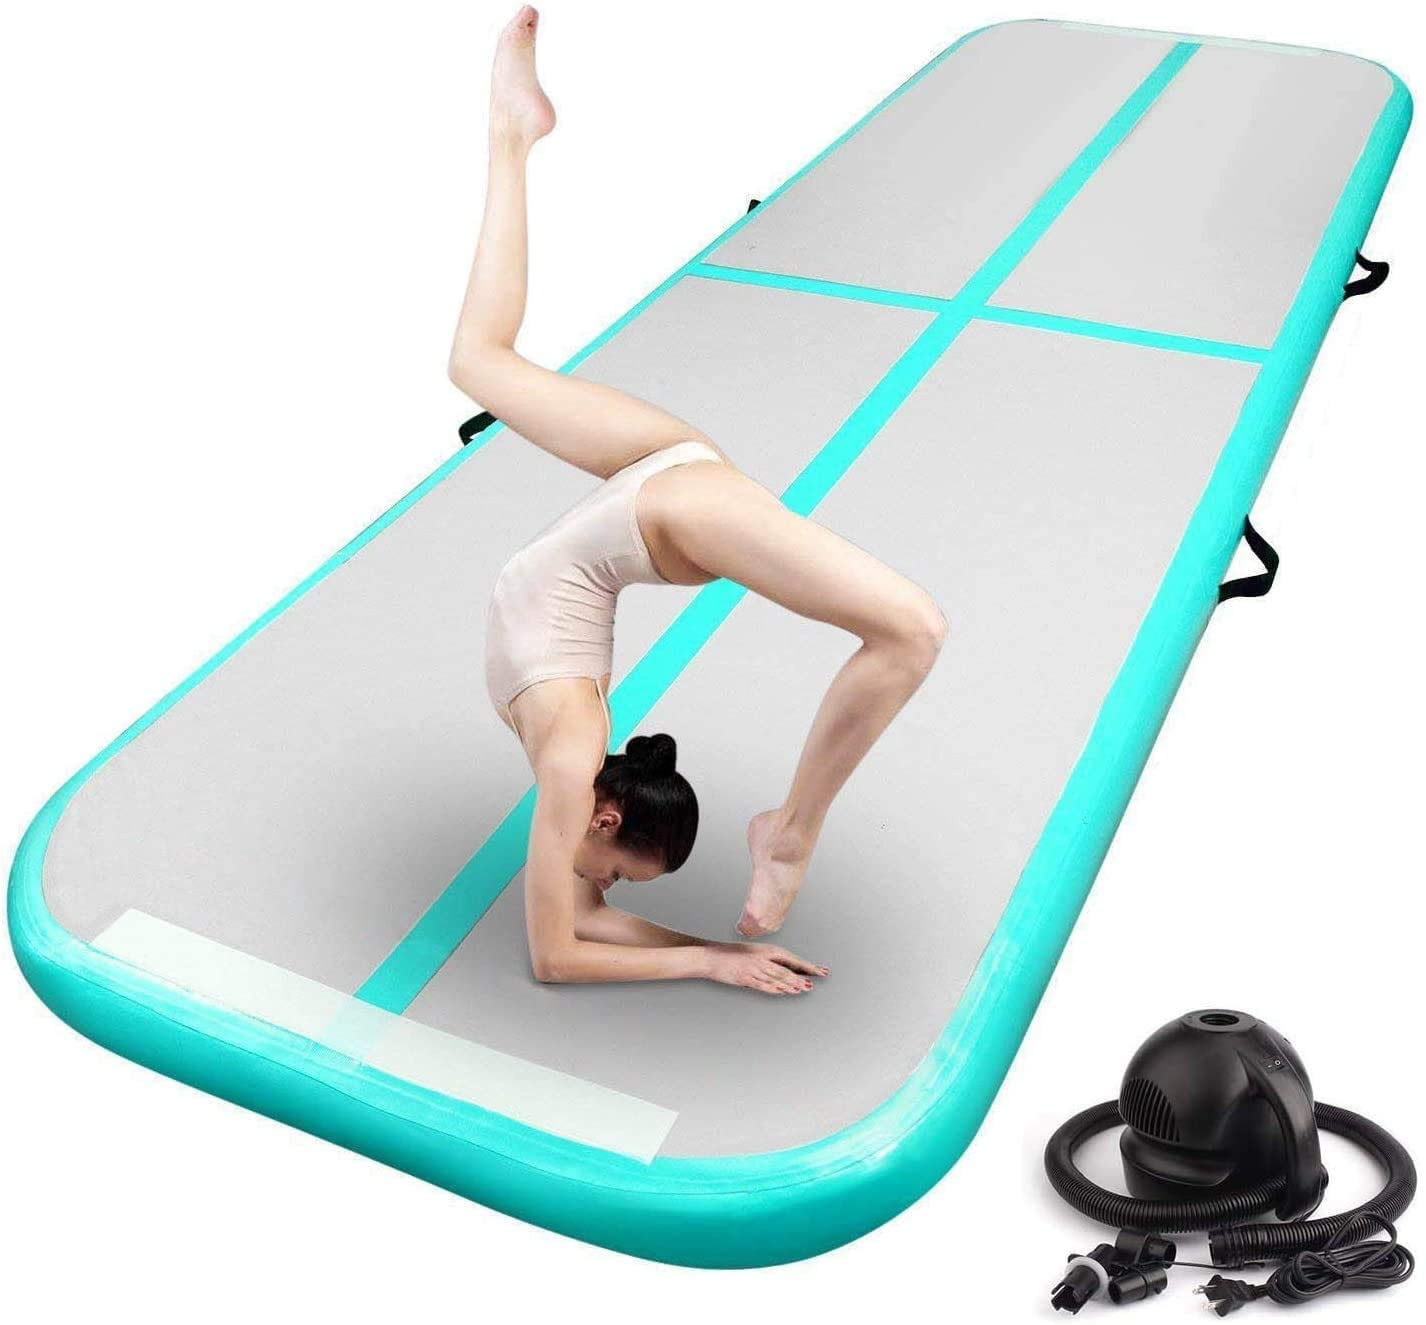 Air Mat Tumble Track Inflatable Training Mat 4 inch Thickness With Carry Bag Electric Pump For Home Use Water Exercise Gymnastics Mats Air Track Tumbling Mat Yoga Cheerleading 